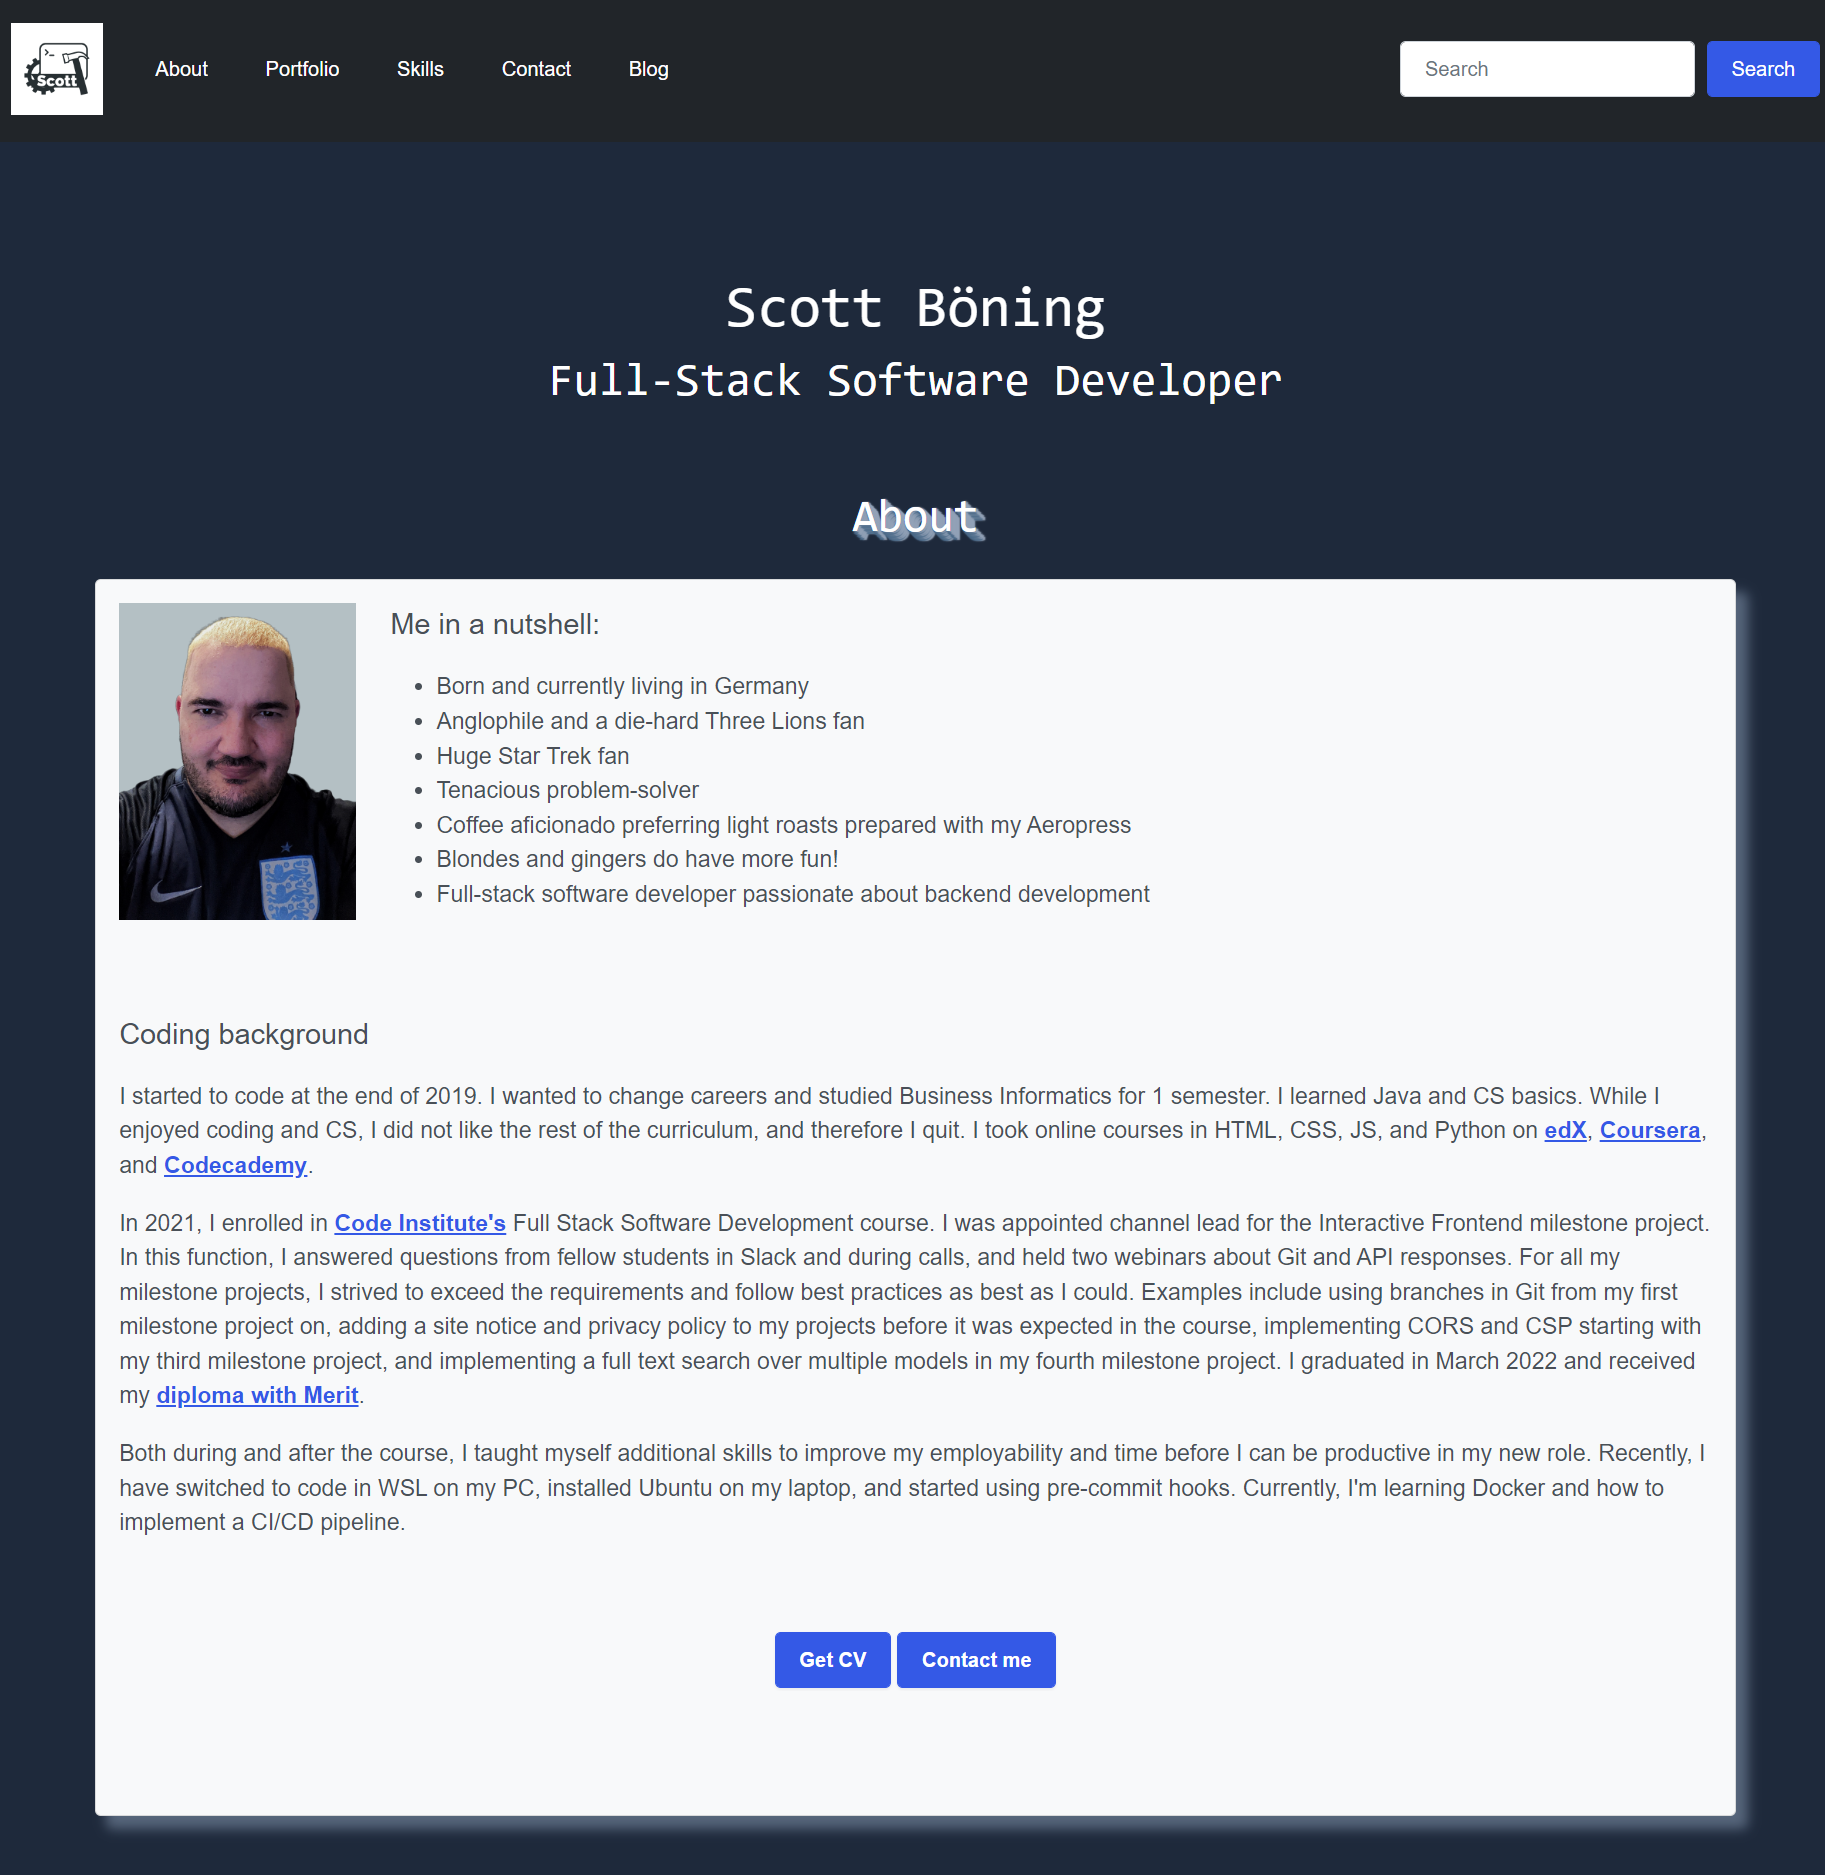 Screenshot with authors photo and info about coding background and some personal info